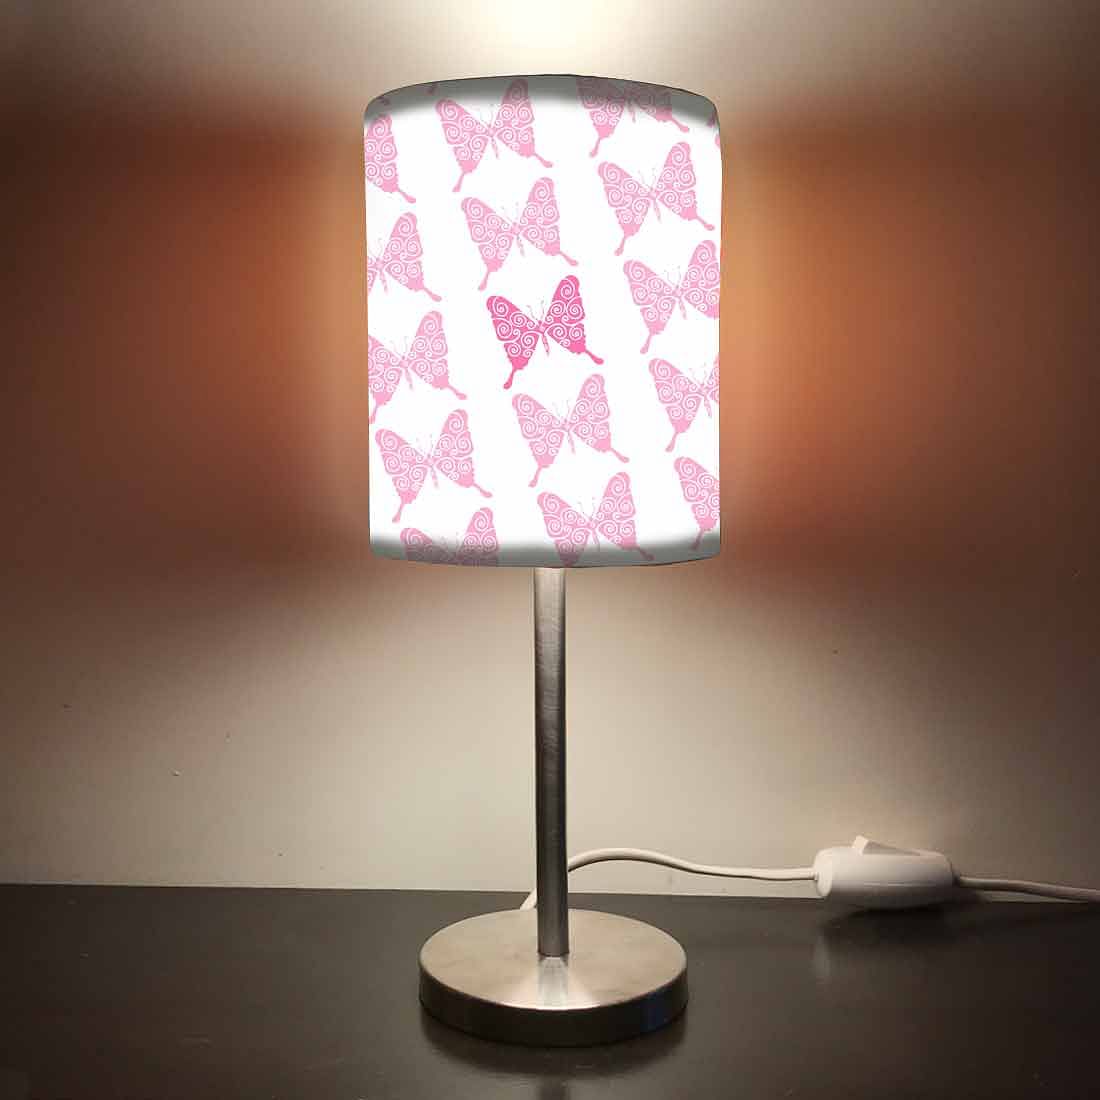 Kids Pretty Table Lamps for Study Room - Pink Butterfly 0004 Nutcase